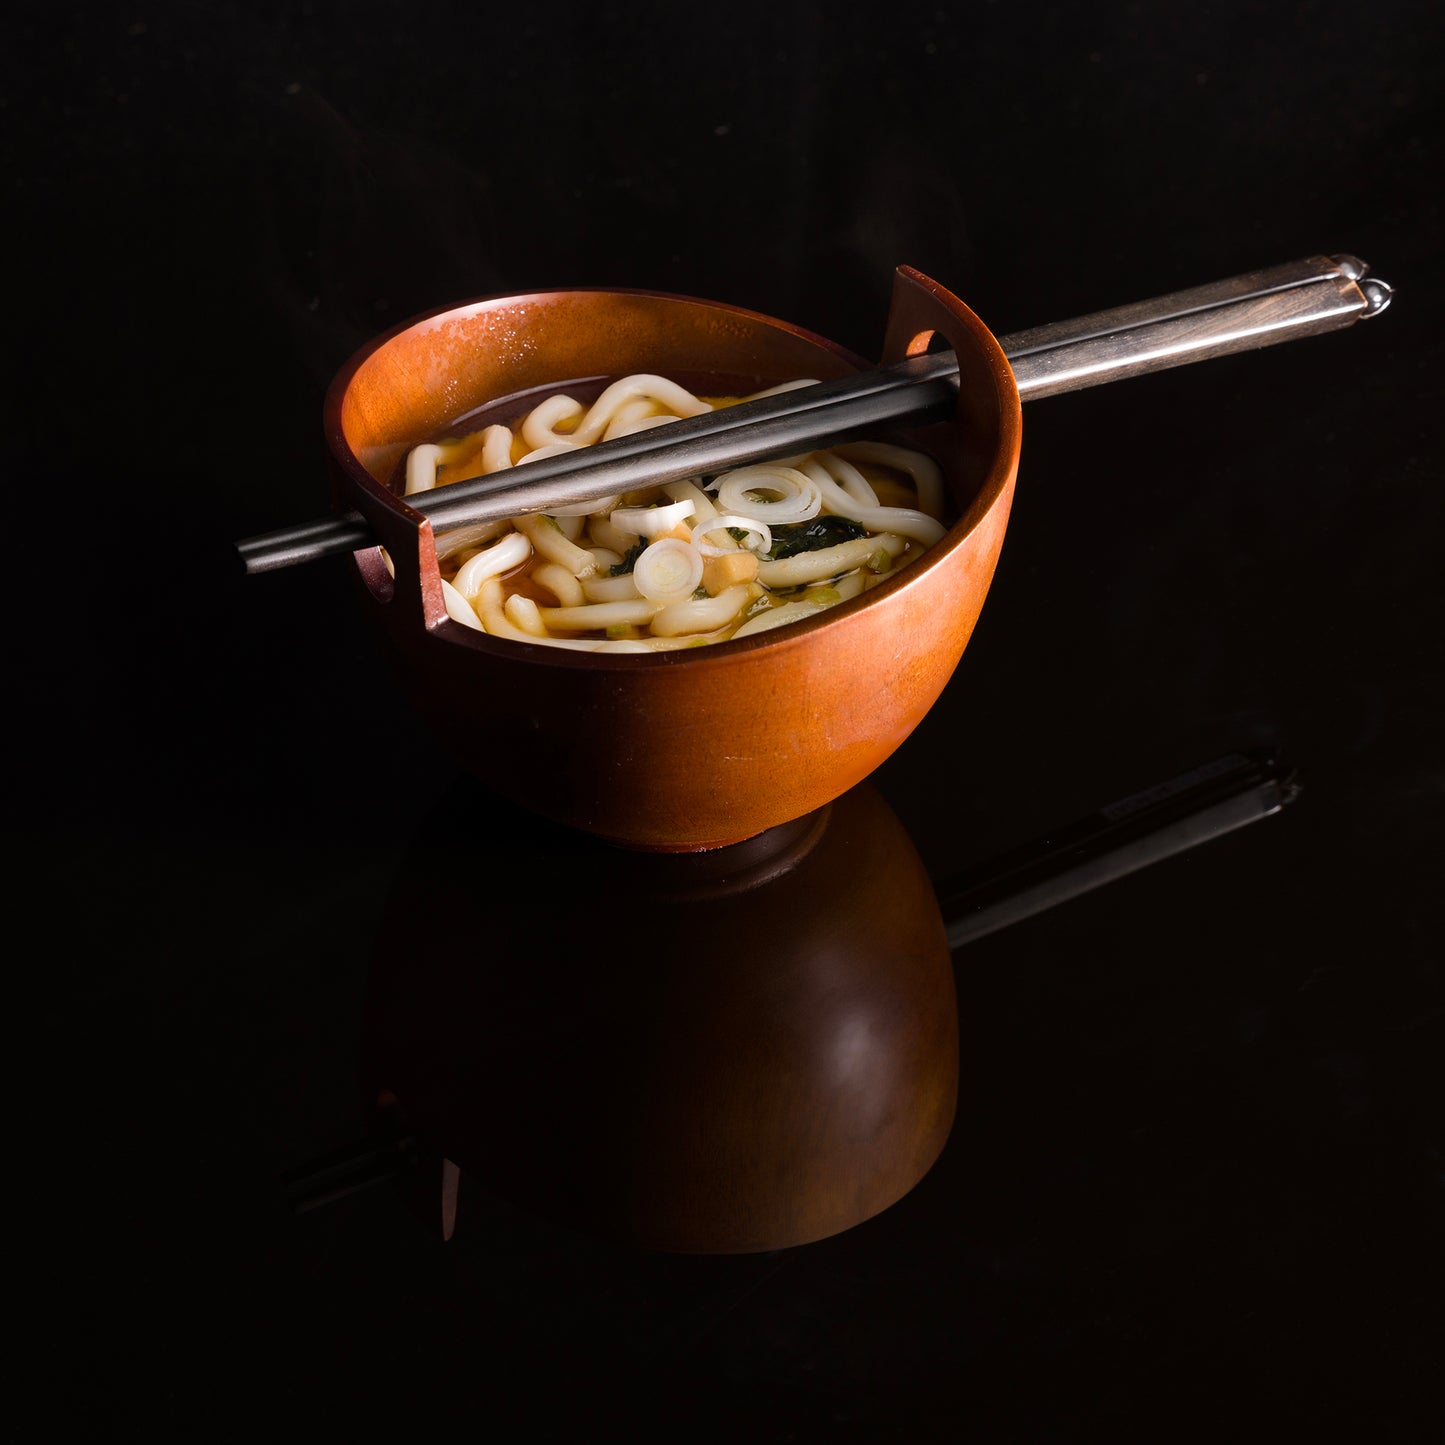 A pair of black wooden chopsticks with a carved lotus flower tip sitting accross the top of a noodle bowl filled with noodles.